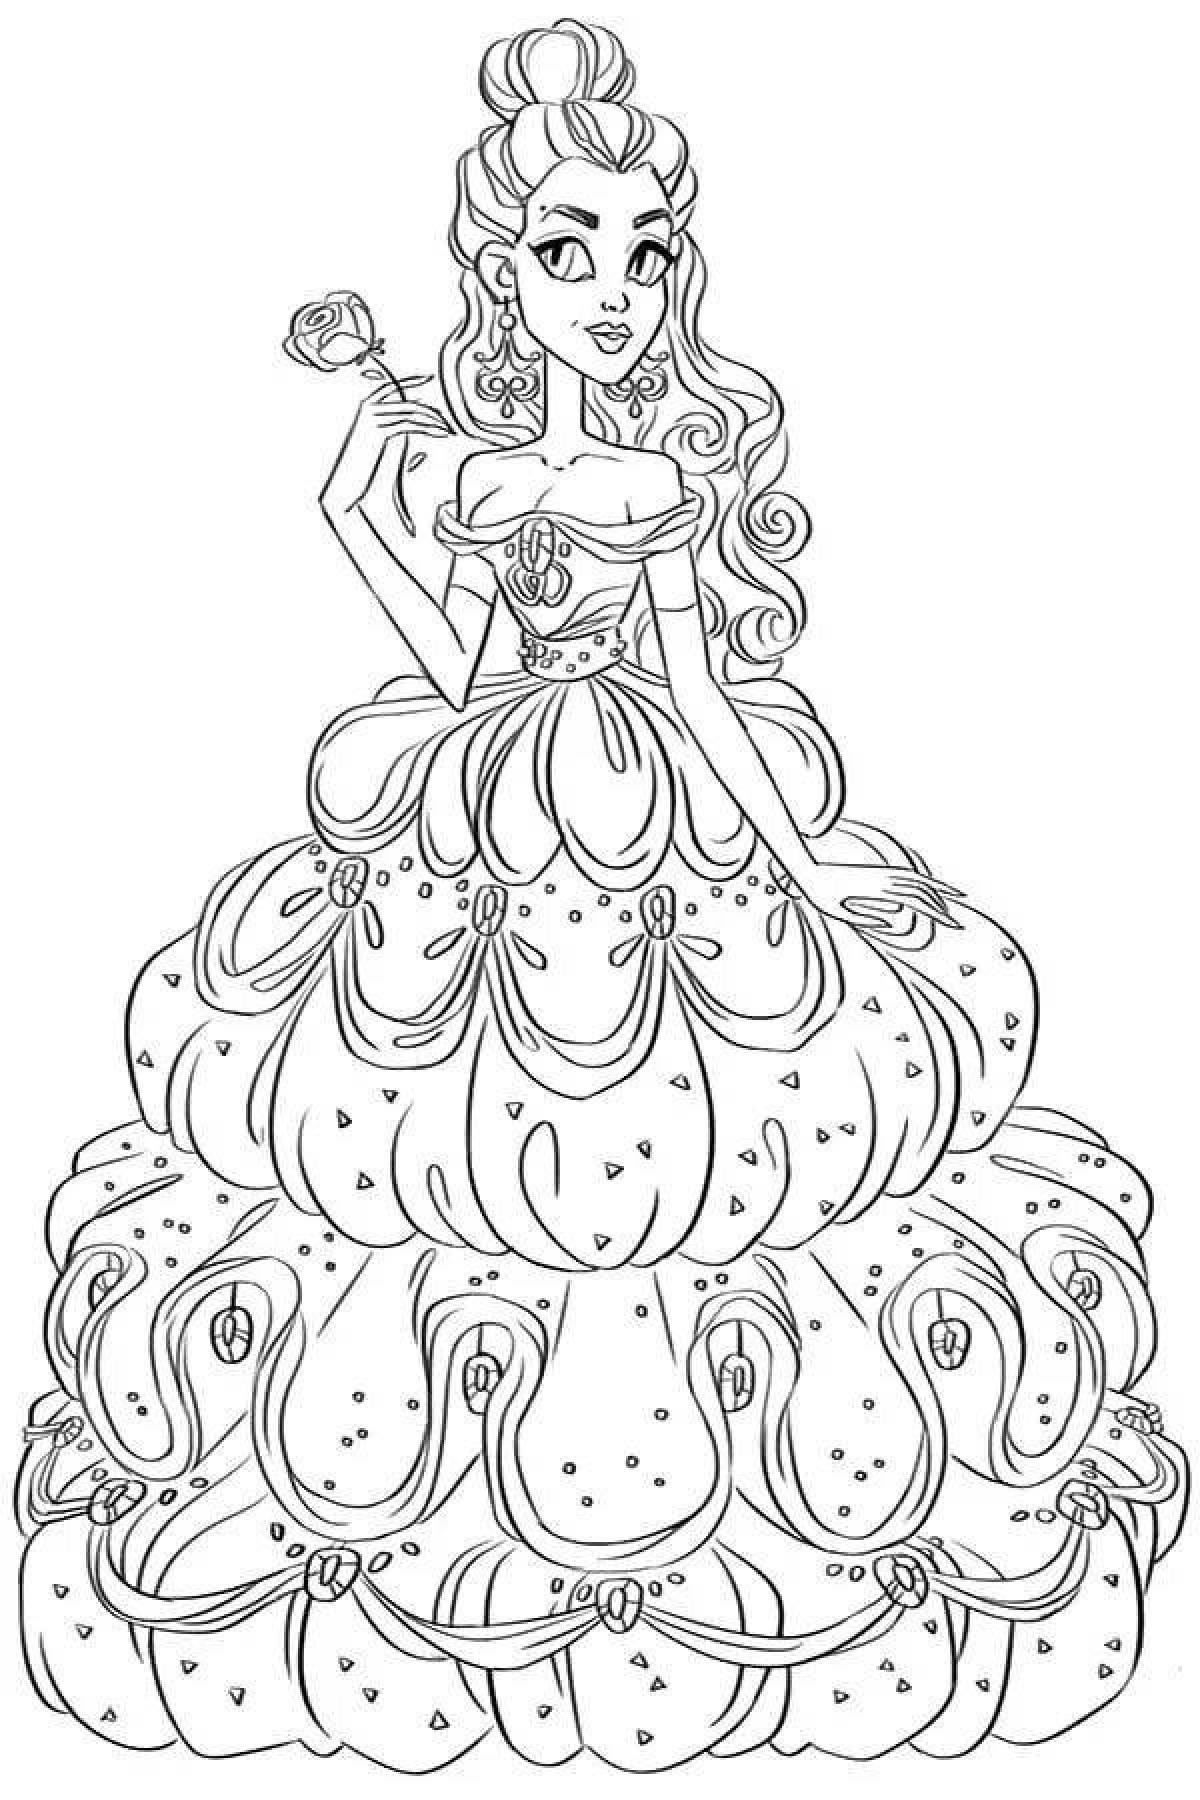 Majestic princess coloring pages